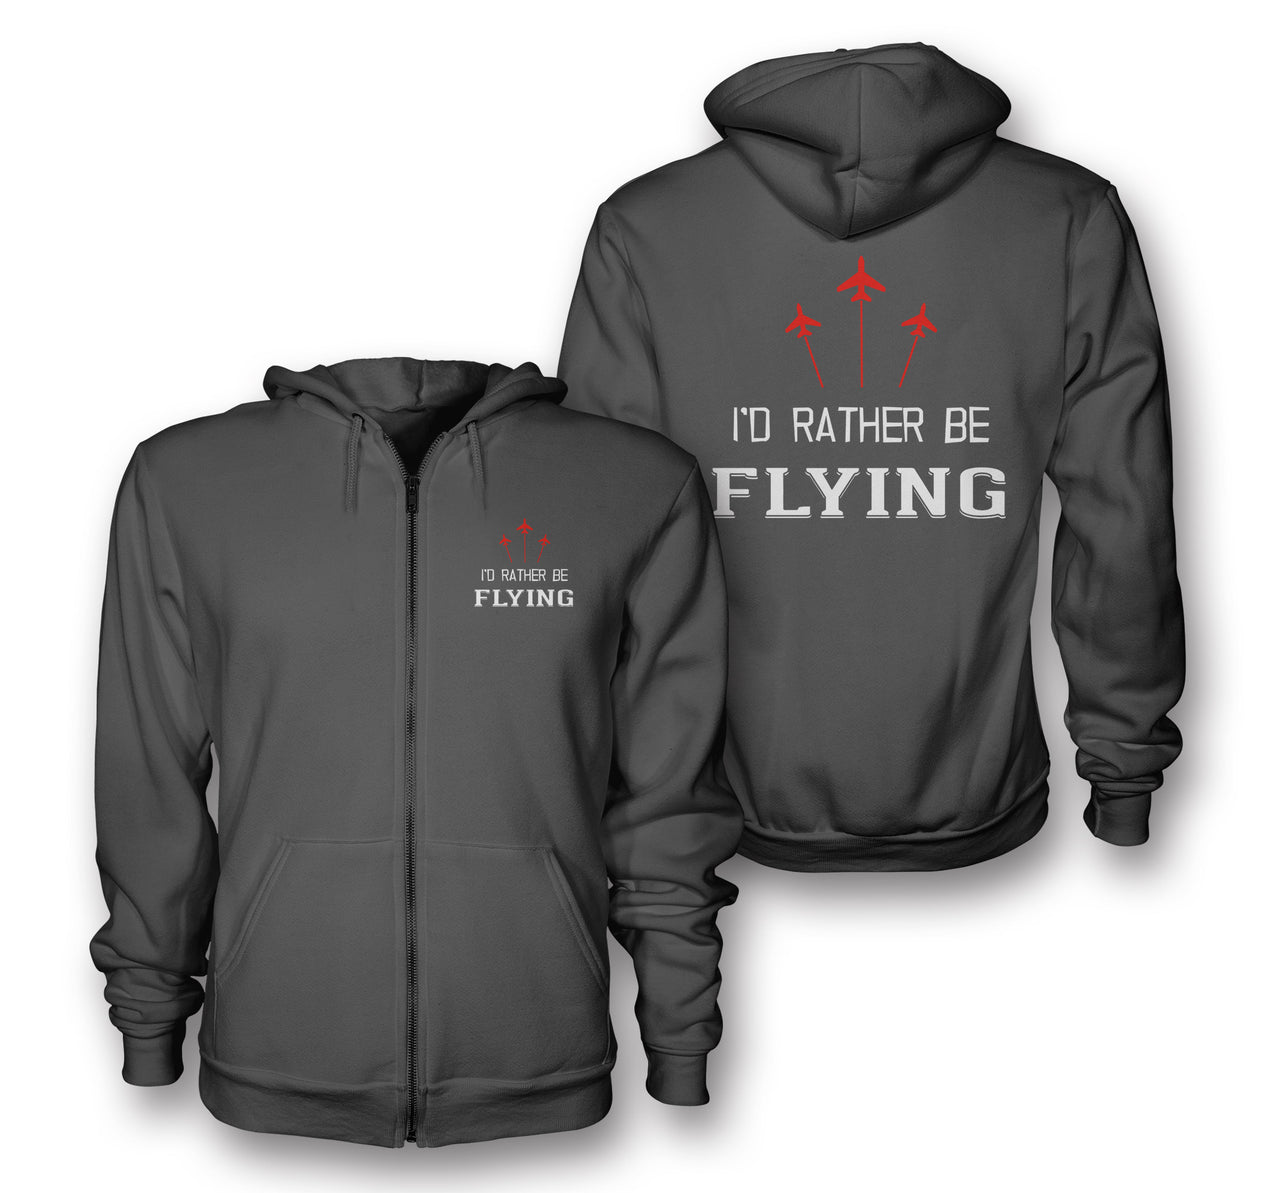 I'D Rather Be Flying Designed Zipped Hoodies